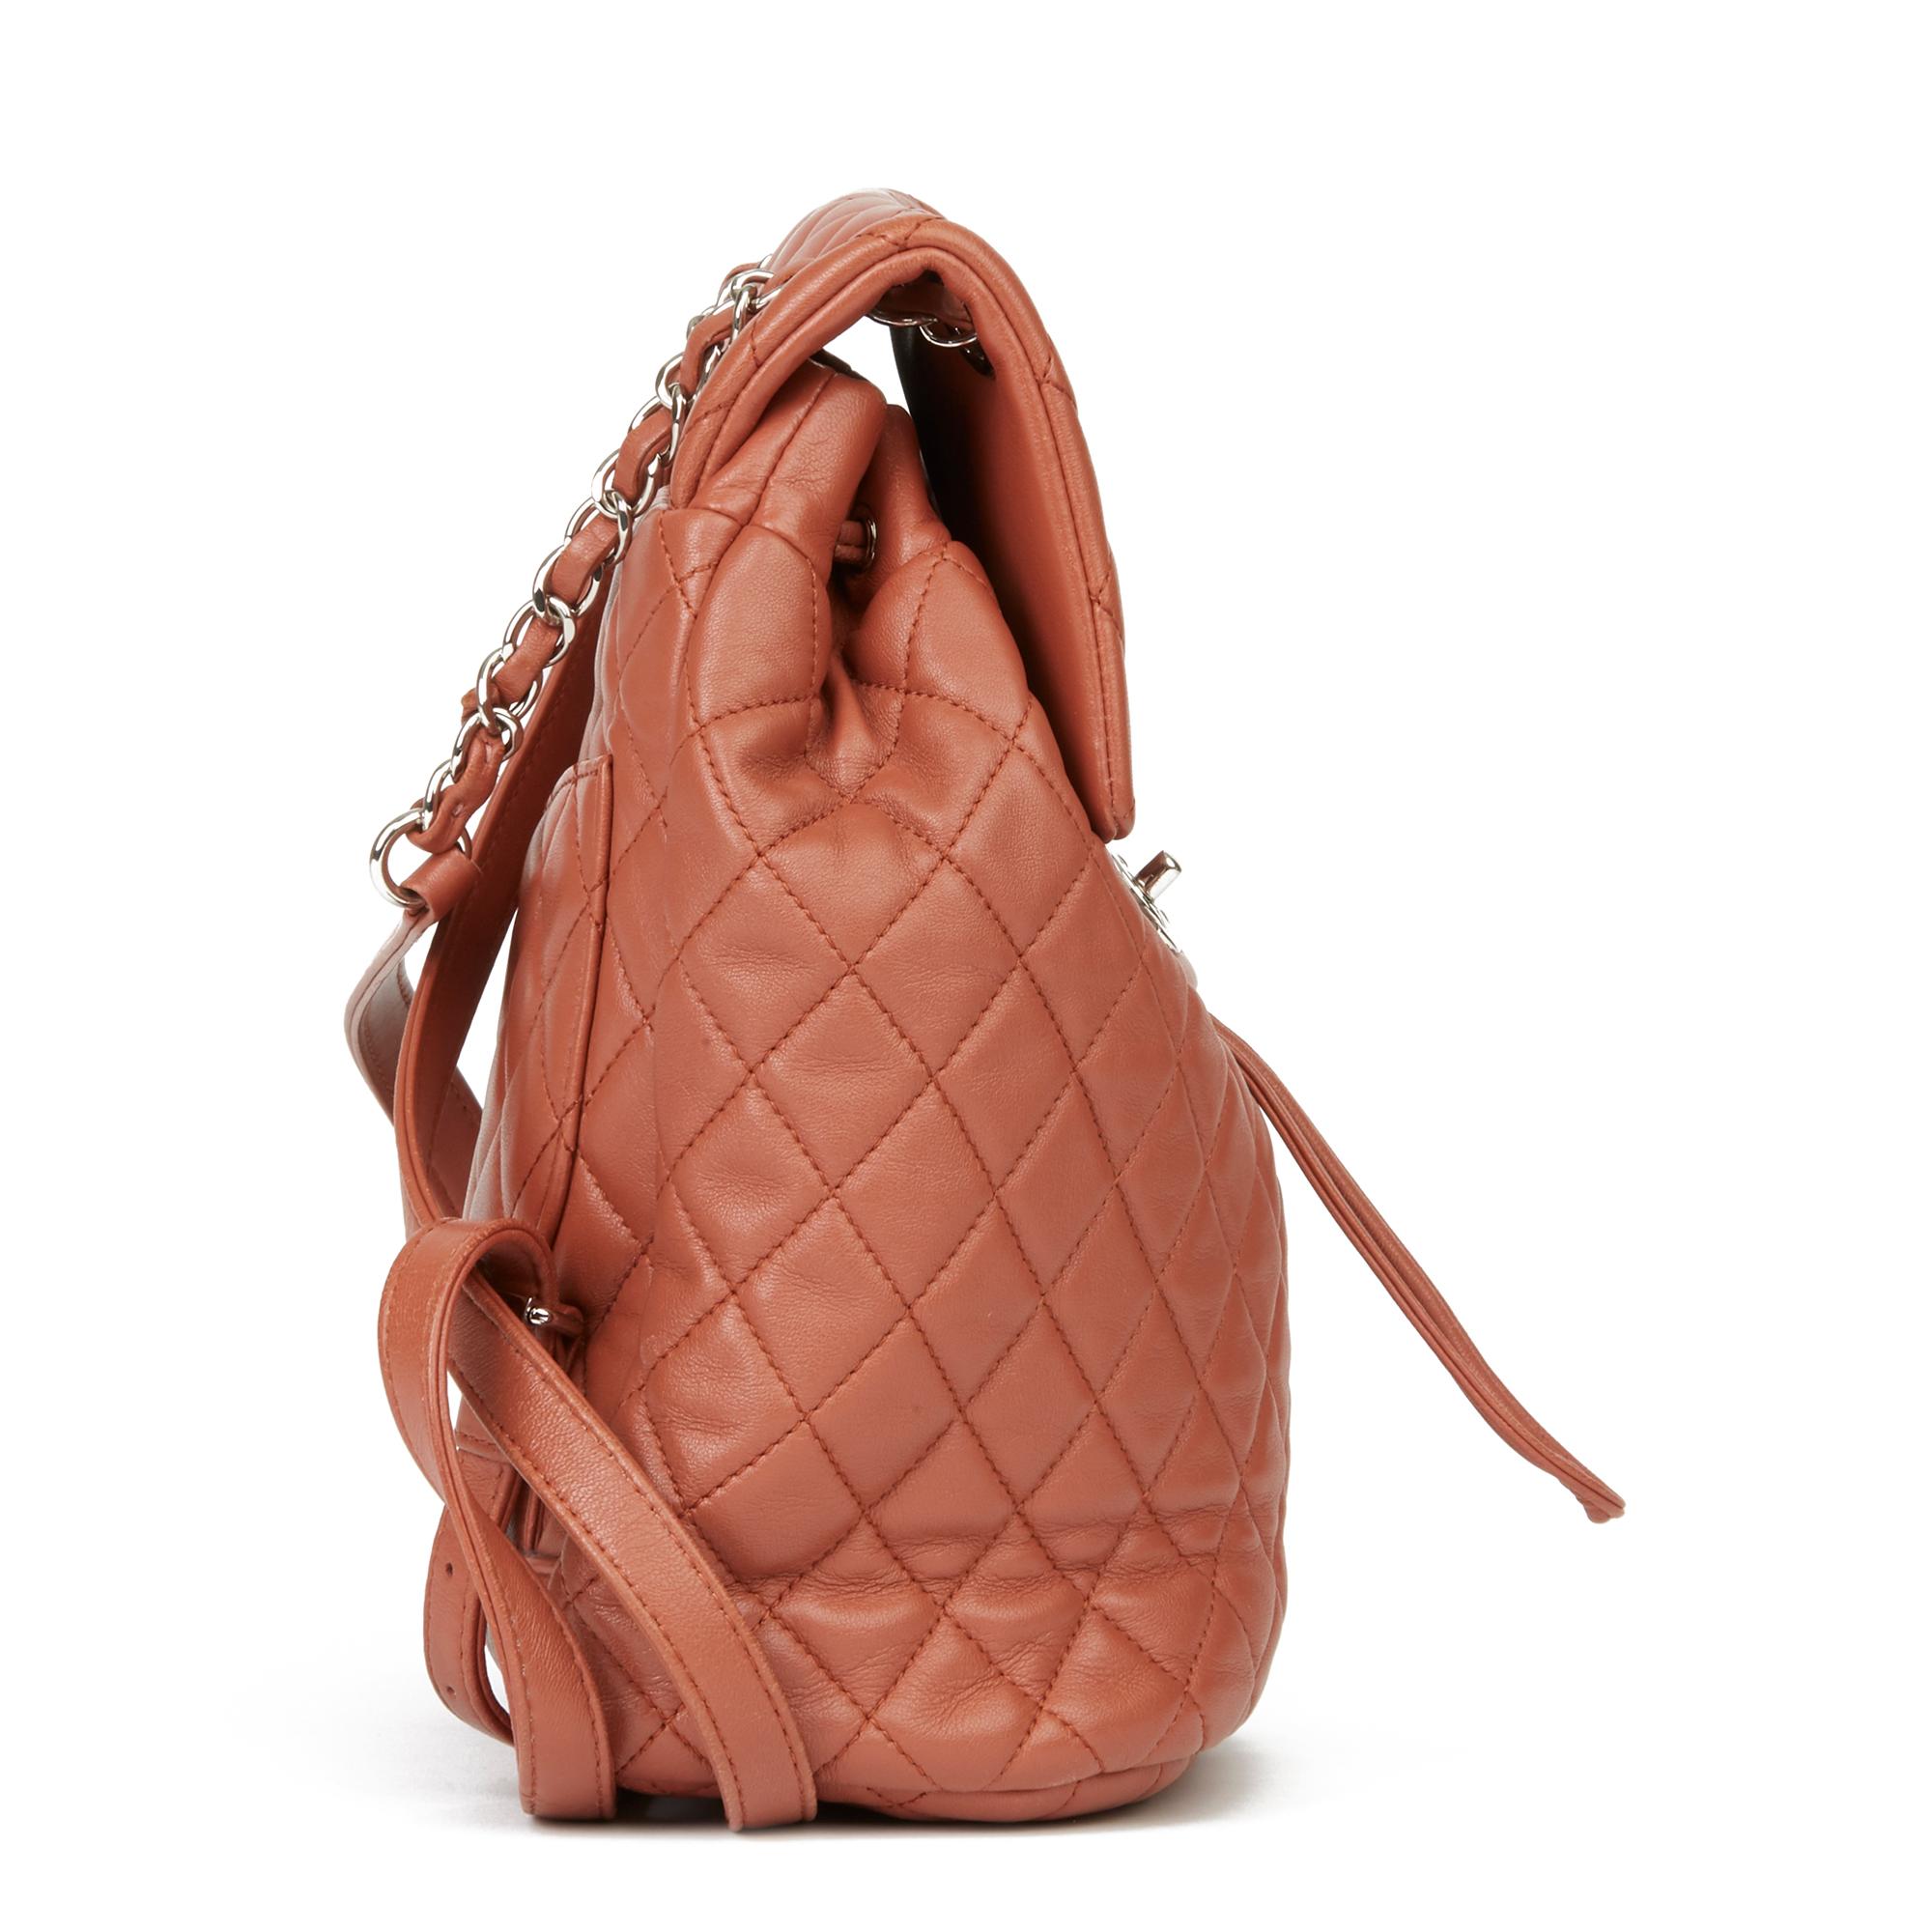 CHANEL
Brick Brown Quilted Lambskin Small Urban Spirit Backpack

Xupes Reference: HB2993
Serial Number: 22273283
Age (Circa): 2016
Accompanied By: Chanel Dust Bag, Authenticity Card
Authenticity Details: Serial Sticker, Authenticity Card (Made in